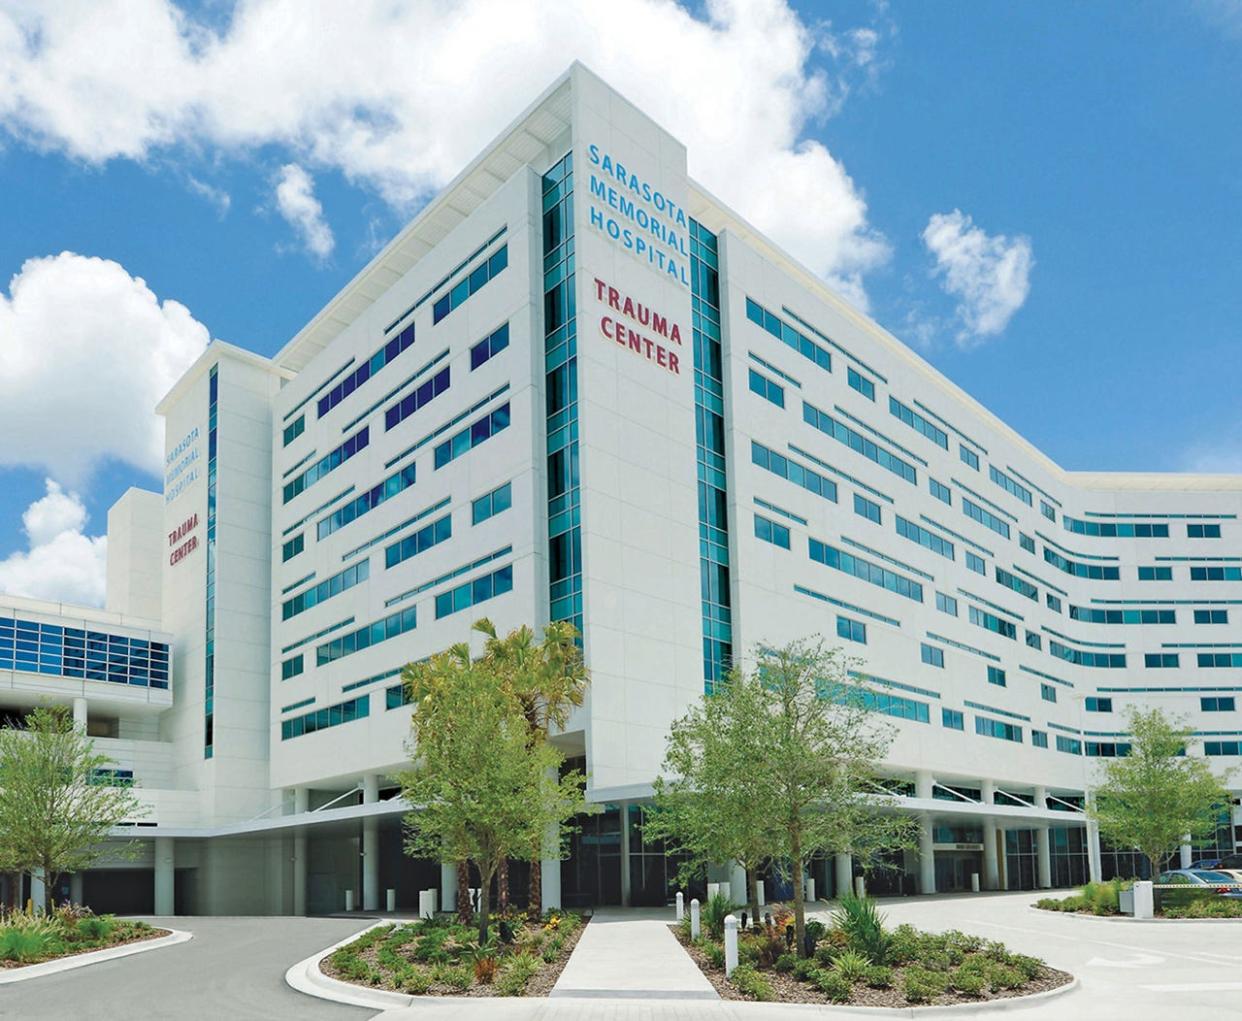 Sarasota Memorial Hospital’s Sarasota Campus was recently recertified as a Level II Trauma Center. The trauma center opened in May, 2015. In its first year, the trauma team cared for more than 1,000 patients. Today, it treats about 4,800 patients a year.